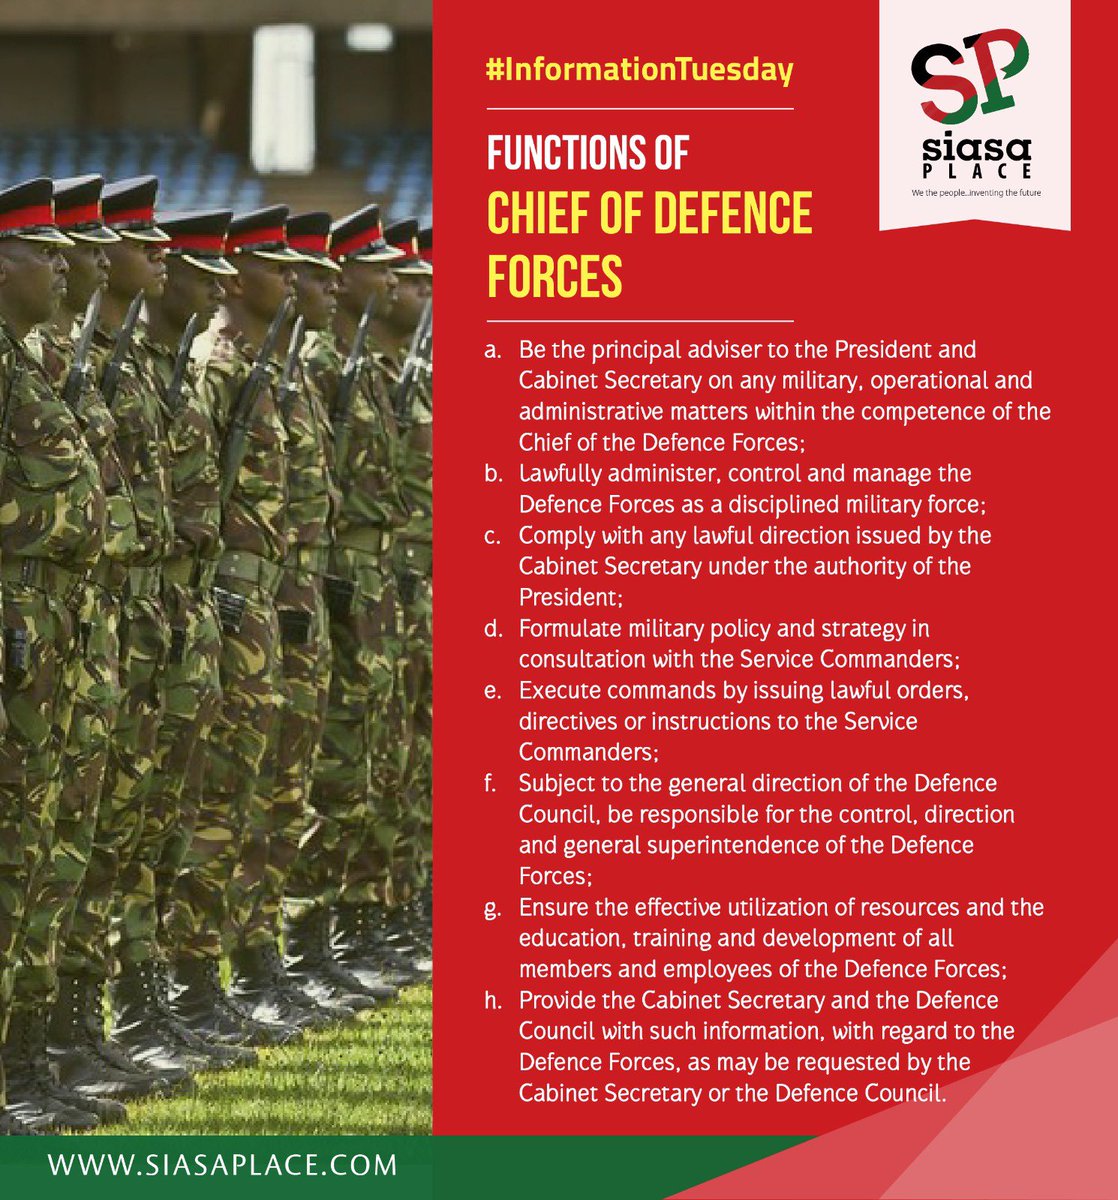 Following the unfortunate demise of the Chief of Defense Forces (CDF) General Francis Ogolla, Lt General Charles Kahariri is serving as the acting CDF and will remain defence chief until when a substantive general is appointed by the president in accordance with the law. Here